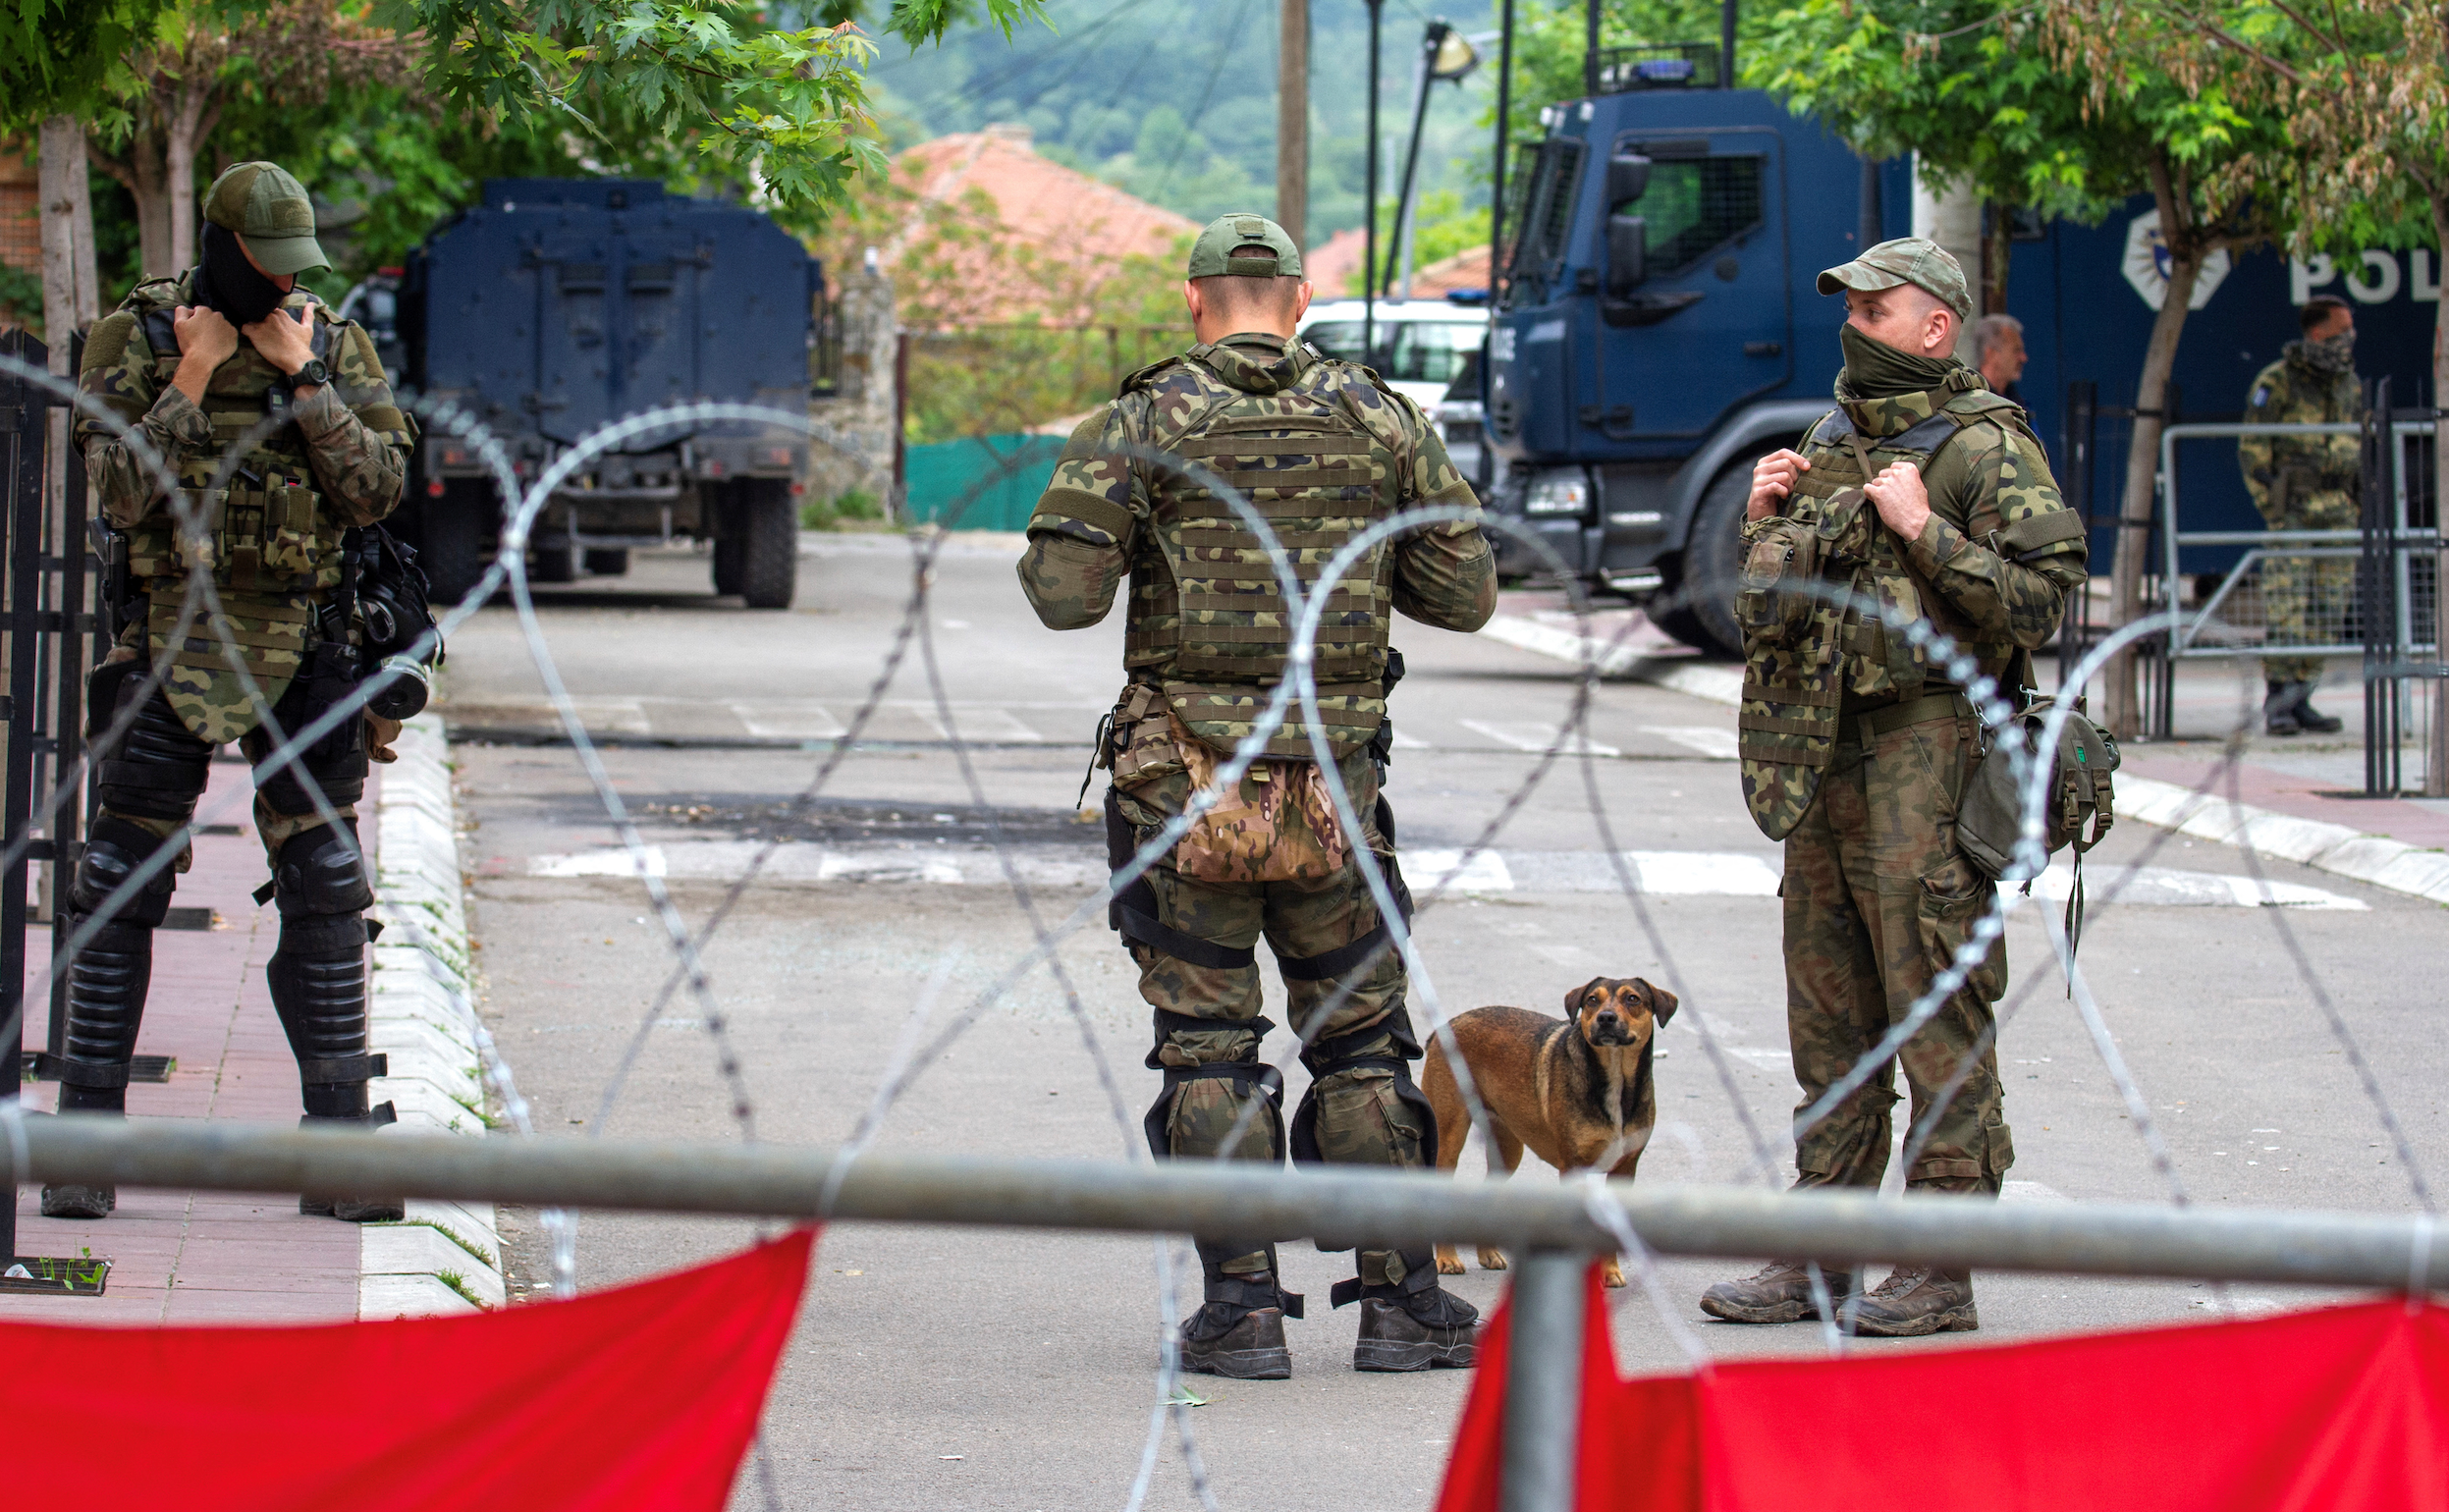 NATO Kosovo Force (KFOR) soldiers stand guard behind razor wire fence in the town of Zvecan, Kosovo